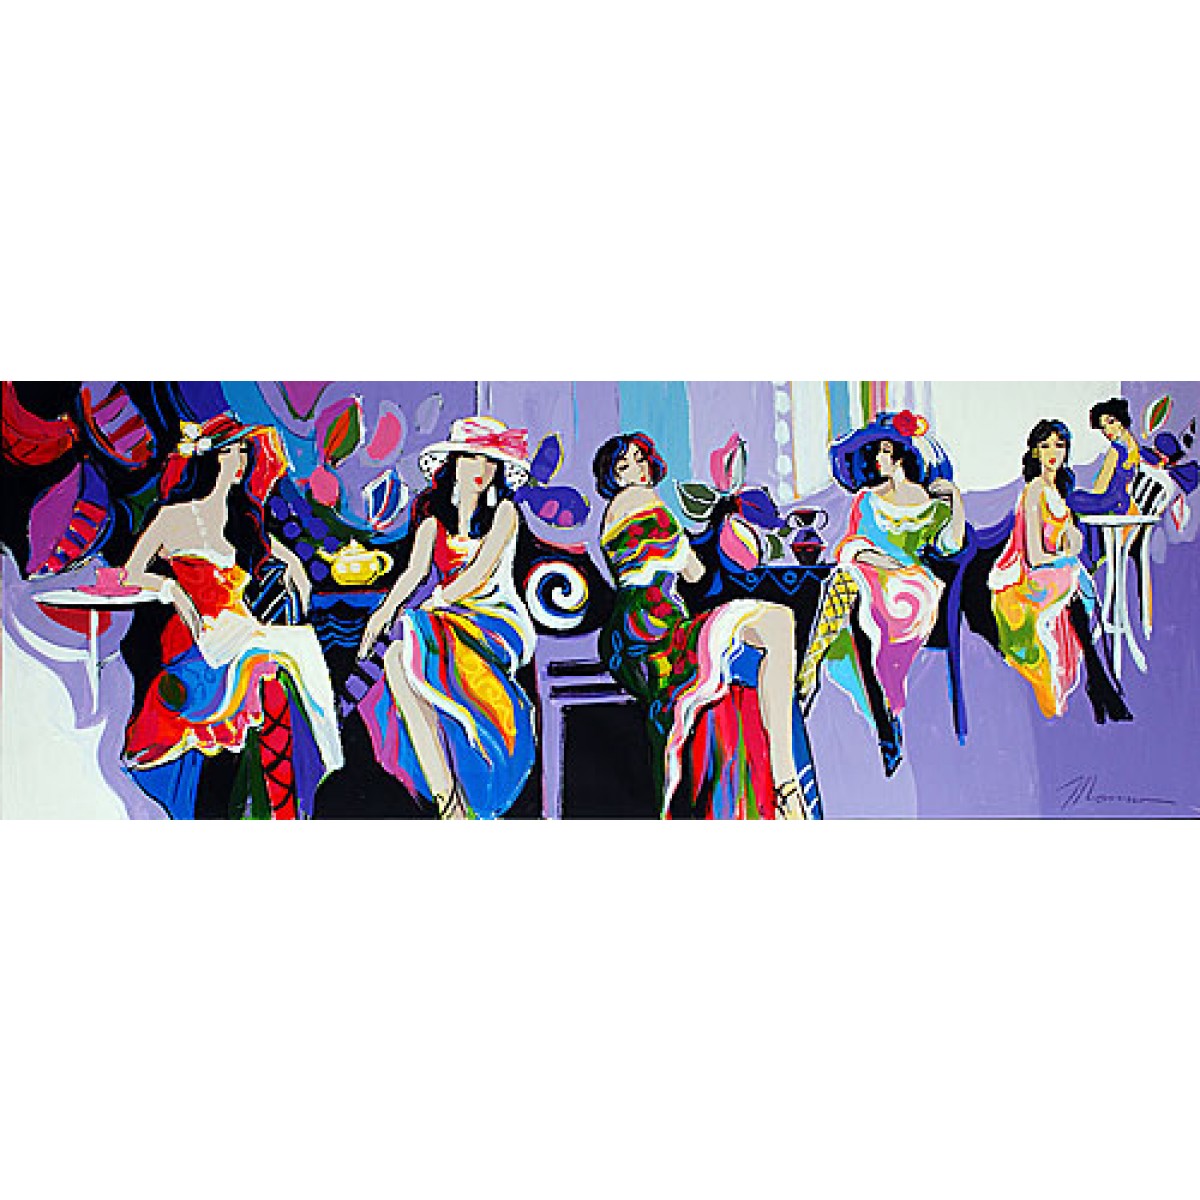 A Night Out by Isaac Maimon